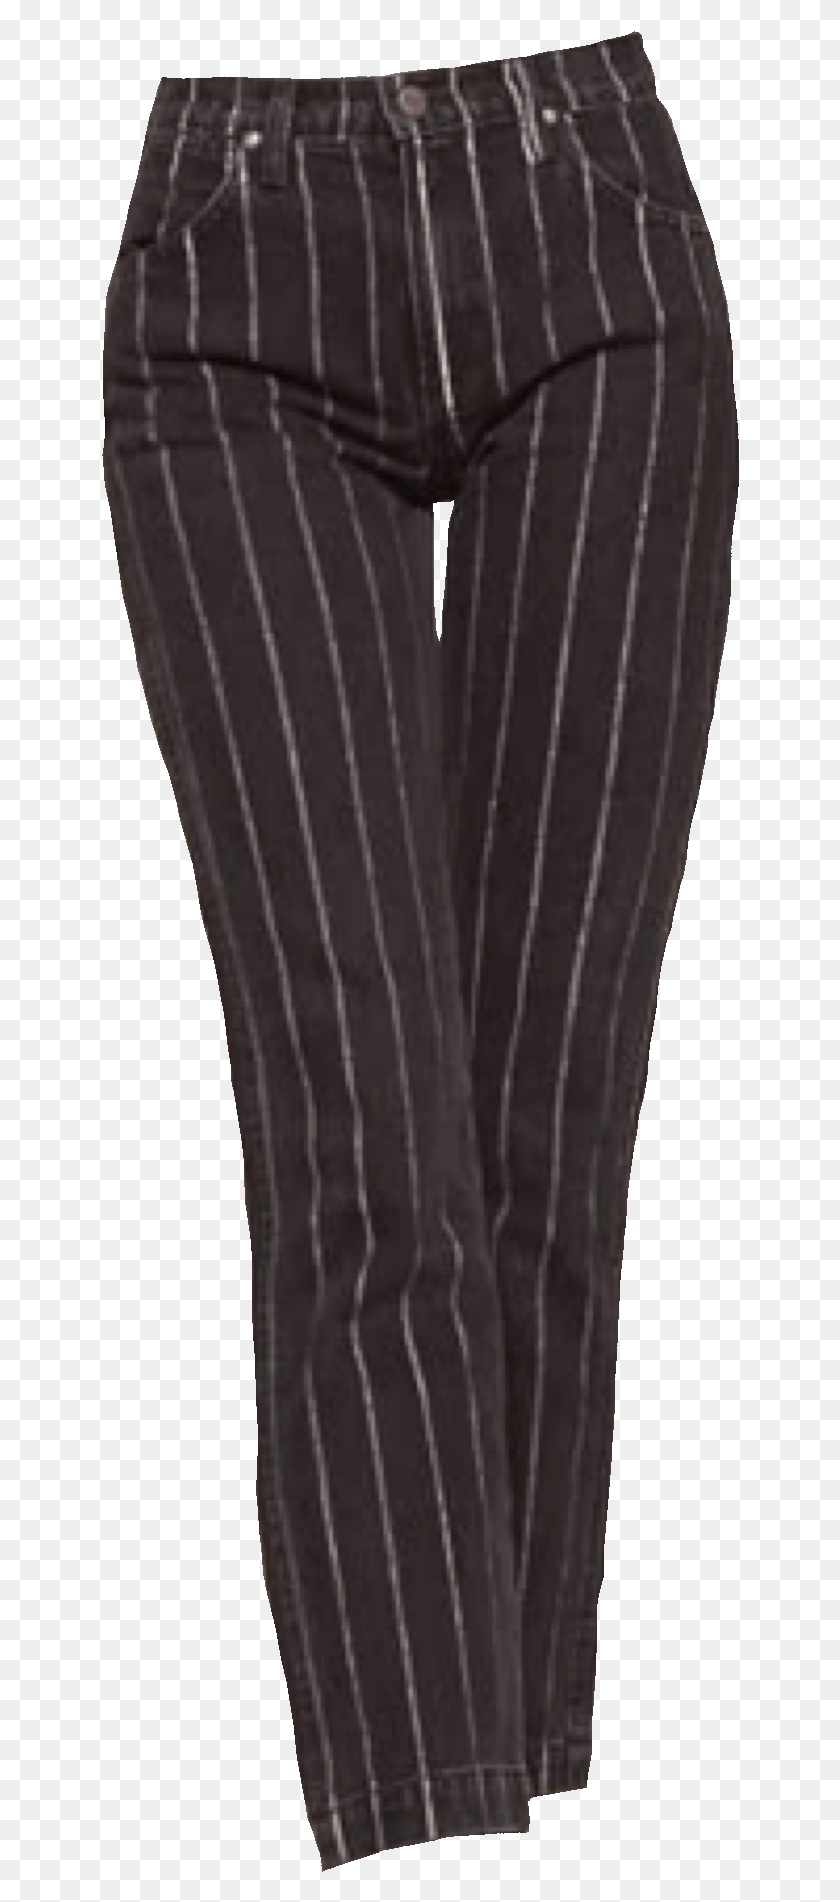 638x1842 Edpng They Make Moodboards Pinstriped Pants Tights, Clothing, Apparel, Footwear Descargar Hd Png